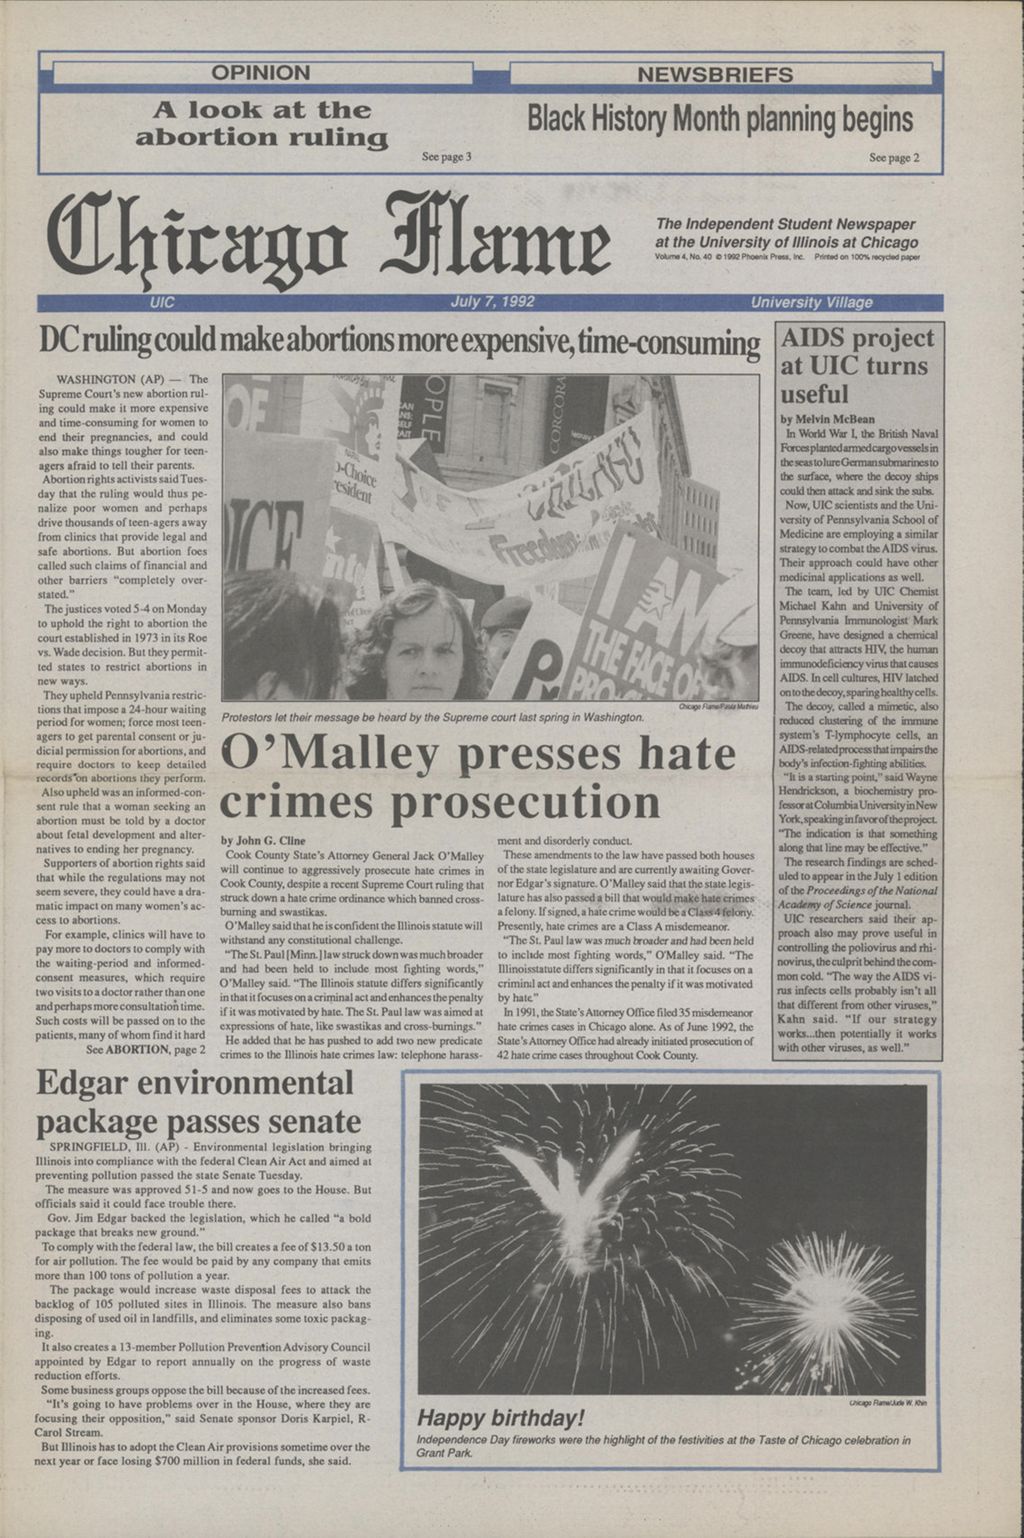 Miniature of Chicago Flame (July 7, 1992)